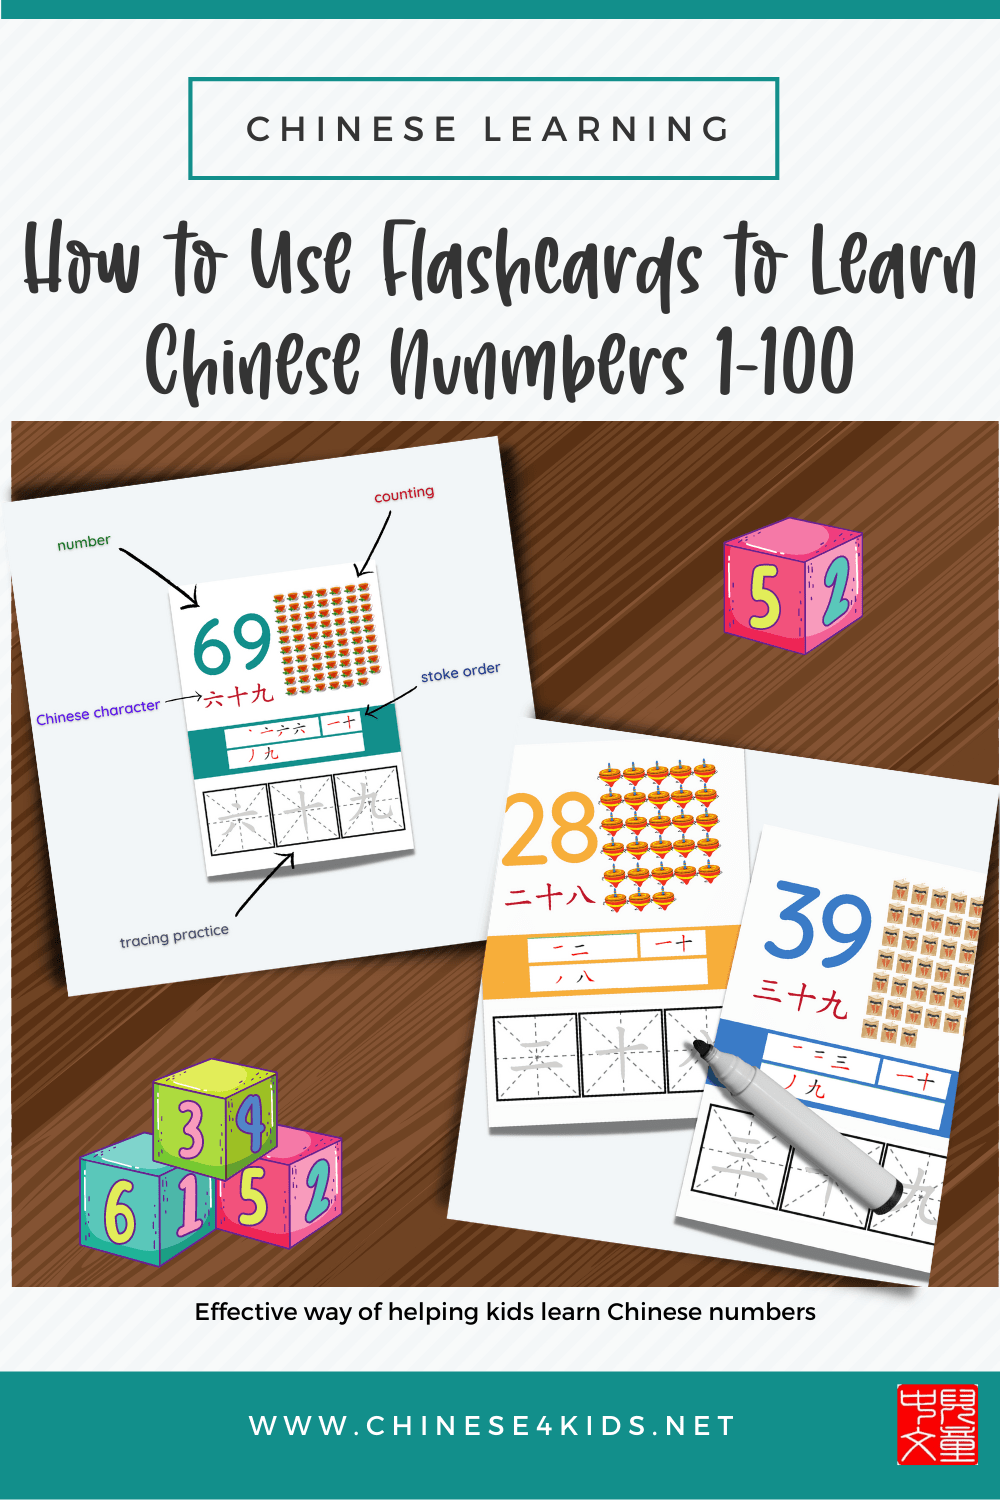 Flashcards are powerful to help kids learn numbers in Chinese. They'll learn how to count, read, and write Chinese numbers with Chinese Number Count and Trace Flashcards #Chineseflashcards #Chinese4kids #Chineseforkids #learnChinese #Chinesenumbers #flashcards #Chinesehomeschooling